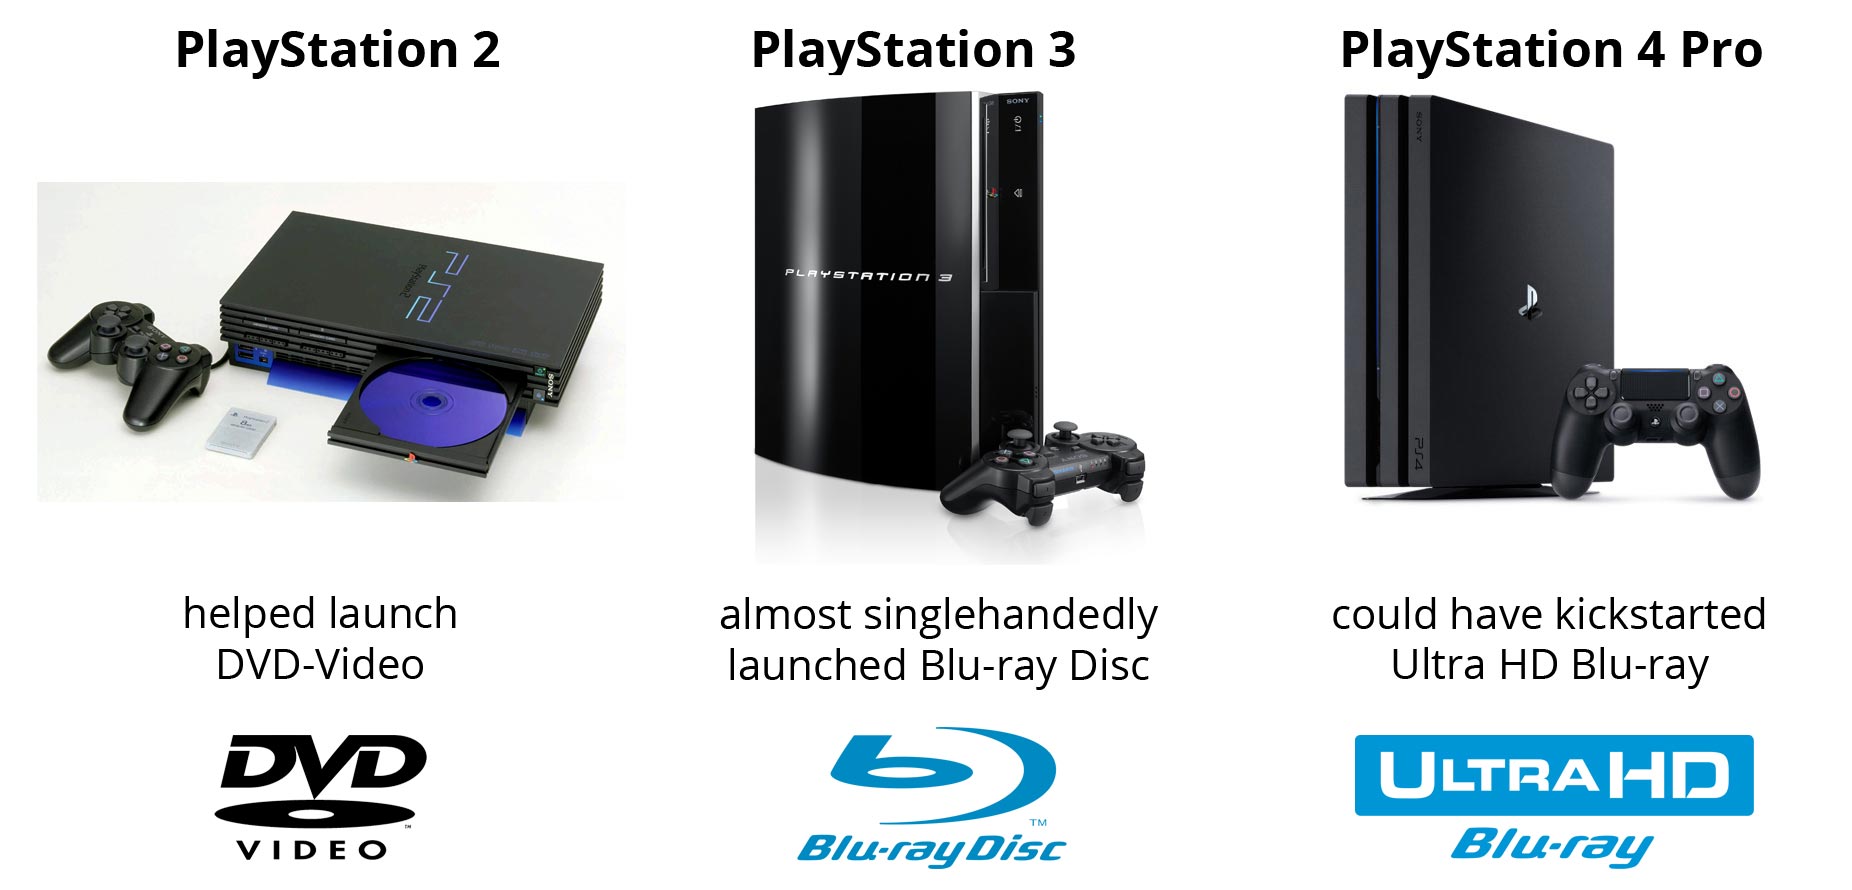 reasons why the PS4 Pro should have an Ultra HD Blu-ray drive